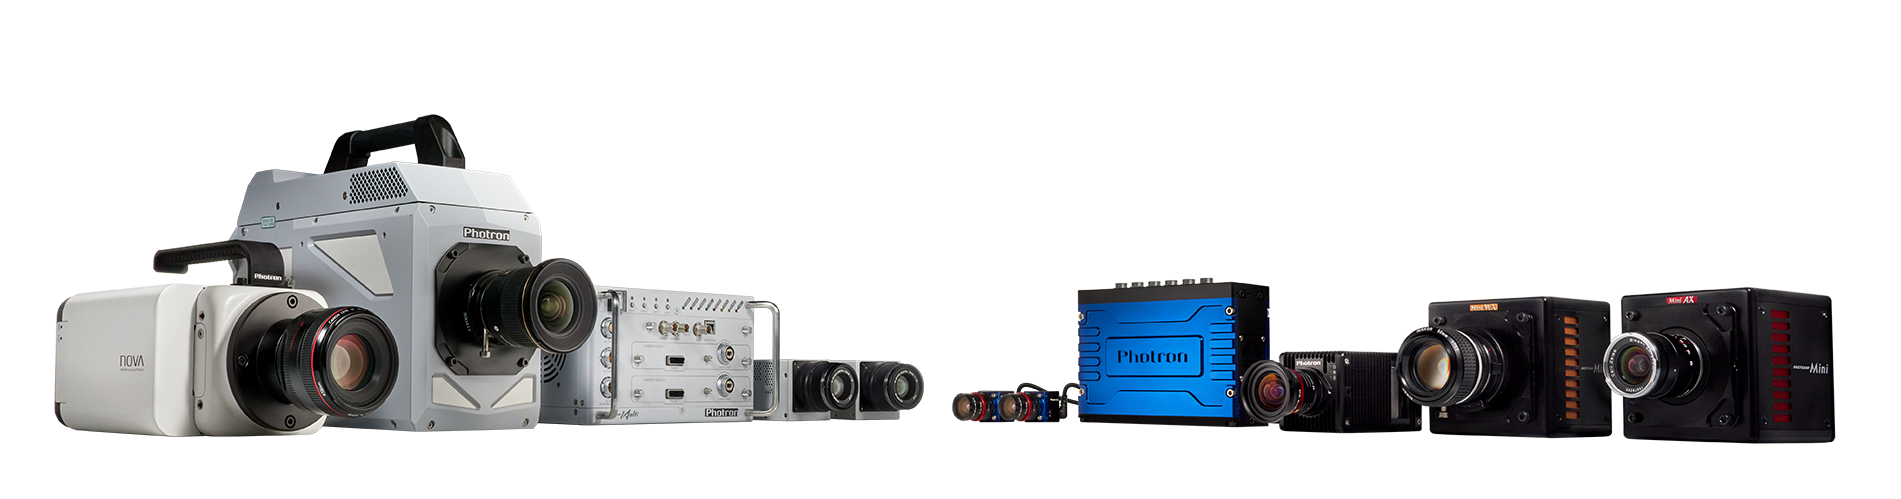 Fast Cameras by Photron 